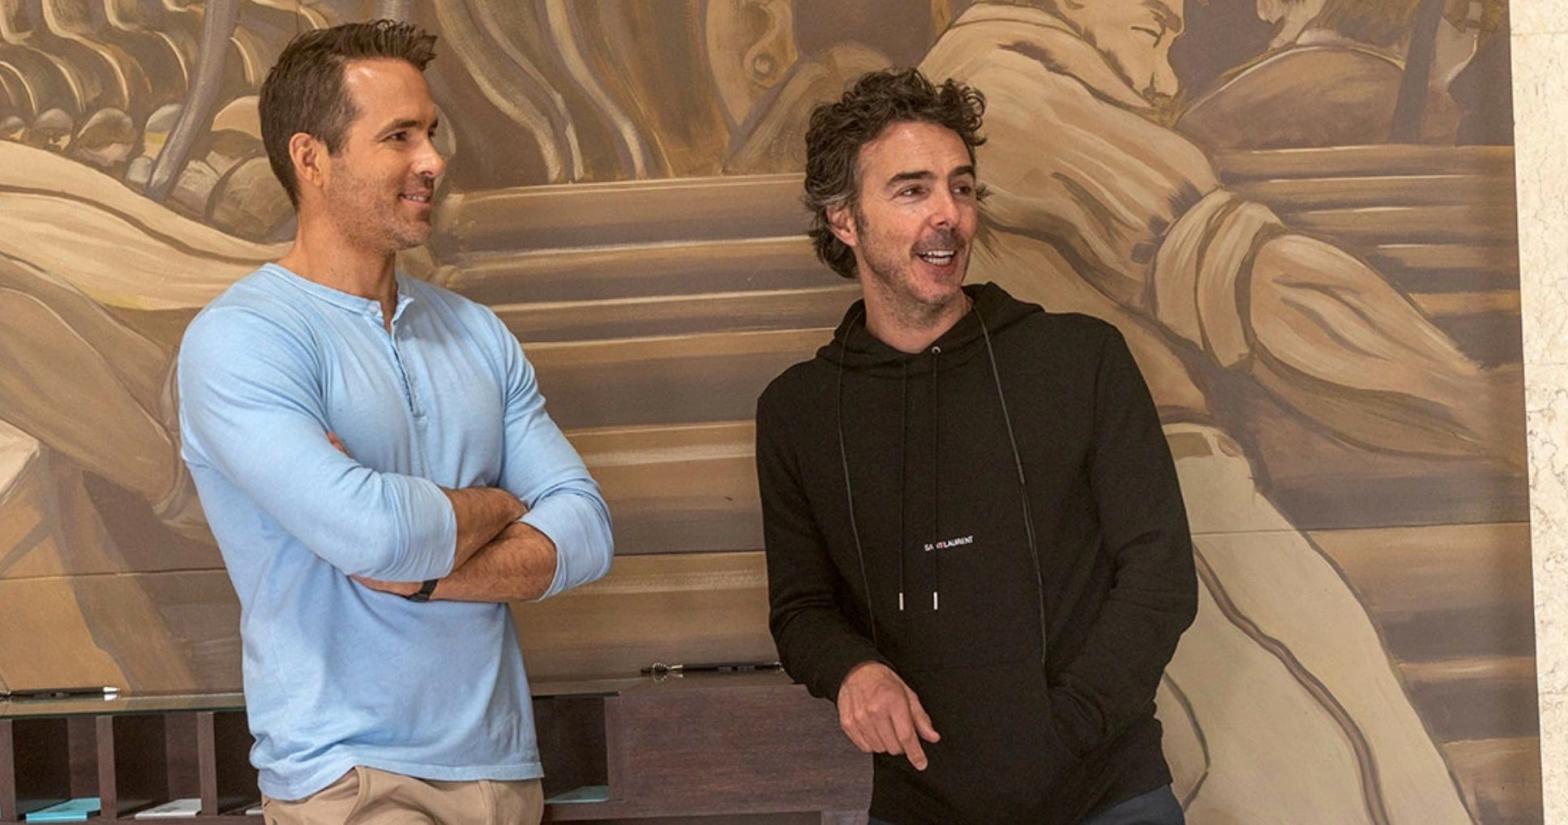 Shawn Levy, right, may develop a Star Wars movie. (Image: Fox)